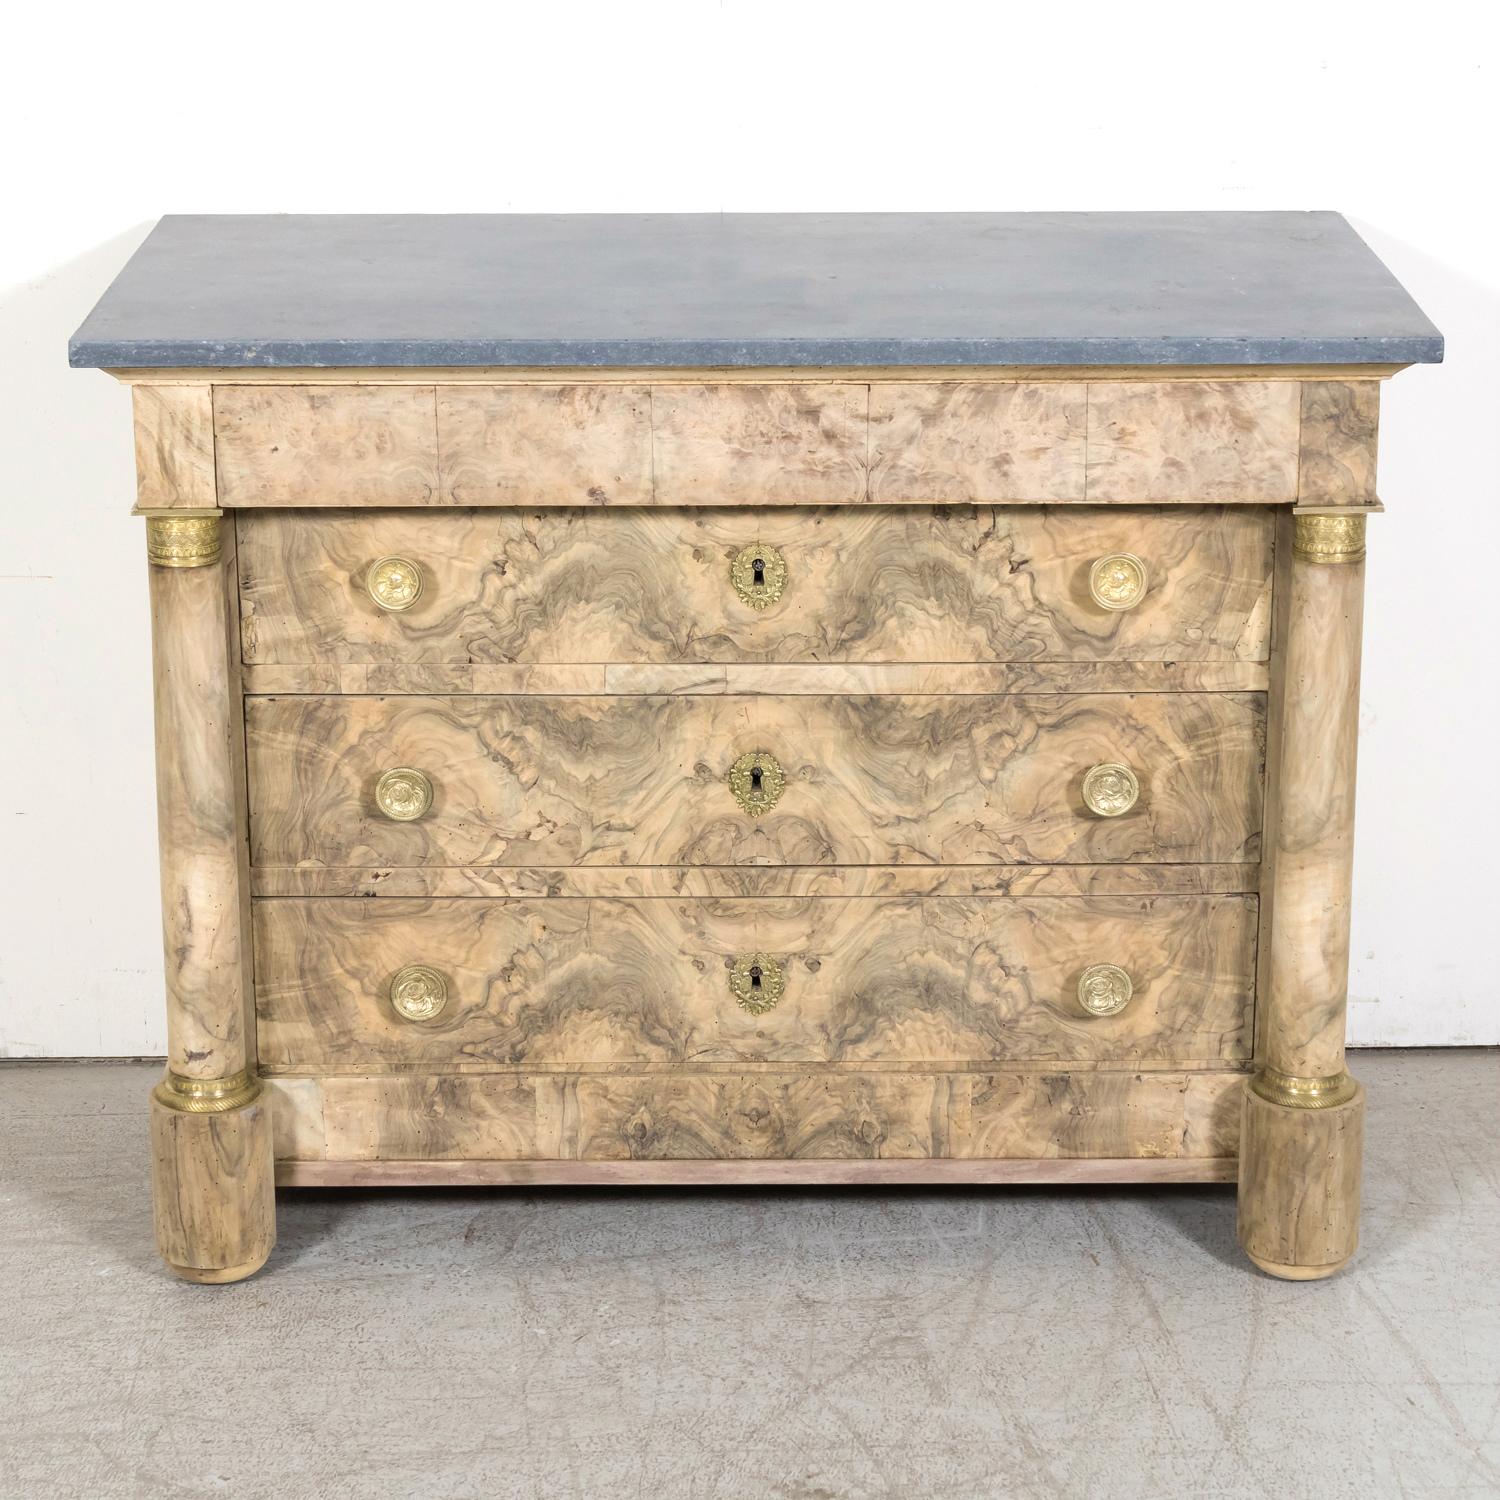 A fine 19th century French Empire period four-drawer commode handcrafted of walnut, circa 1810. Having a bleached finish, this handsome antique French chest of drawers features a bookmatched burled walnut front with a gray fossil marble top resting